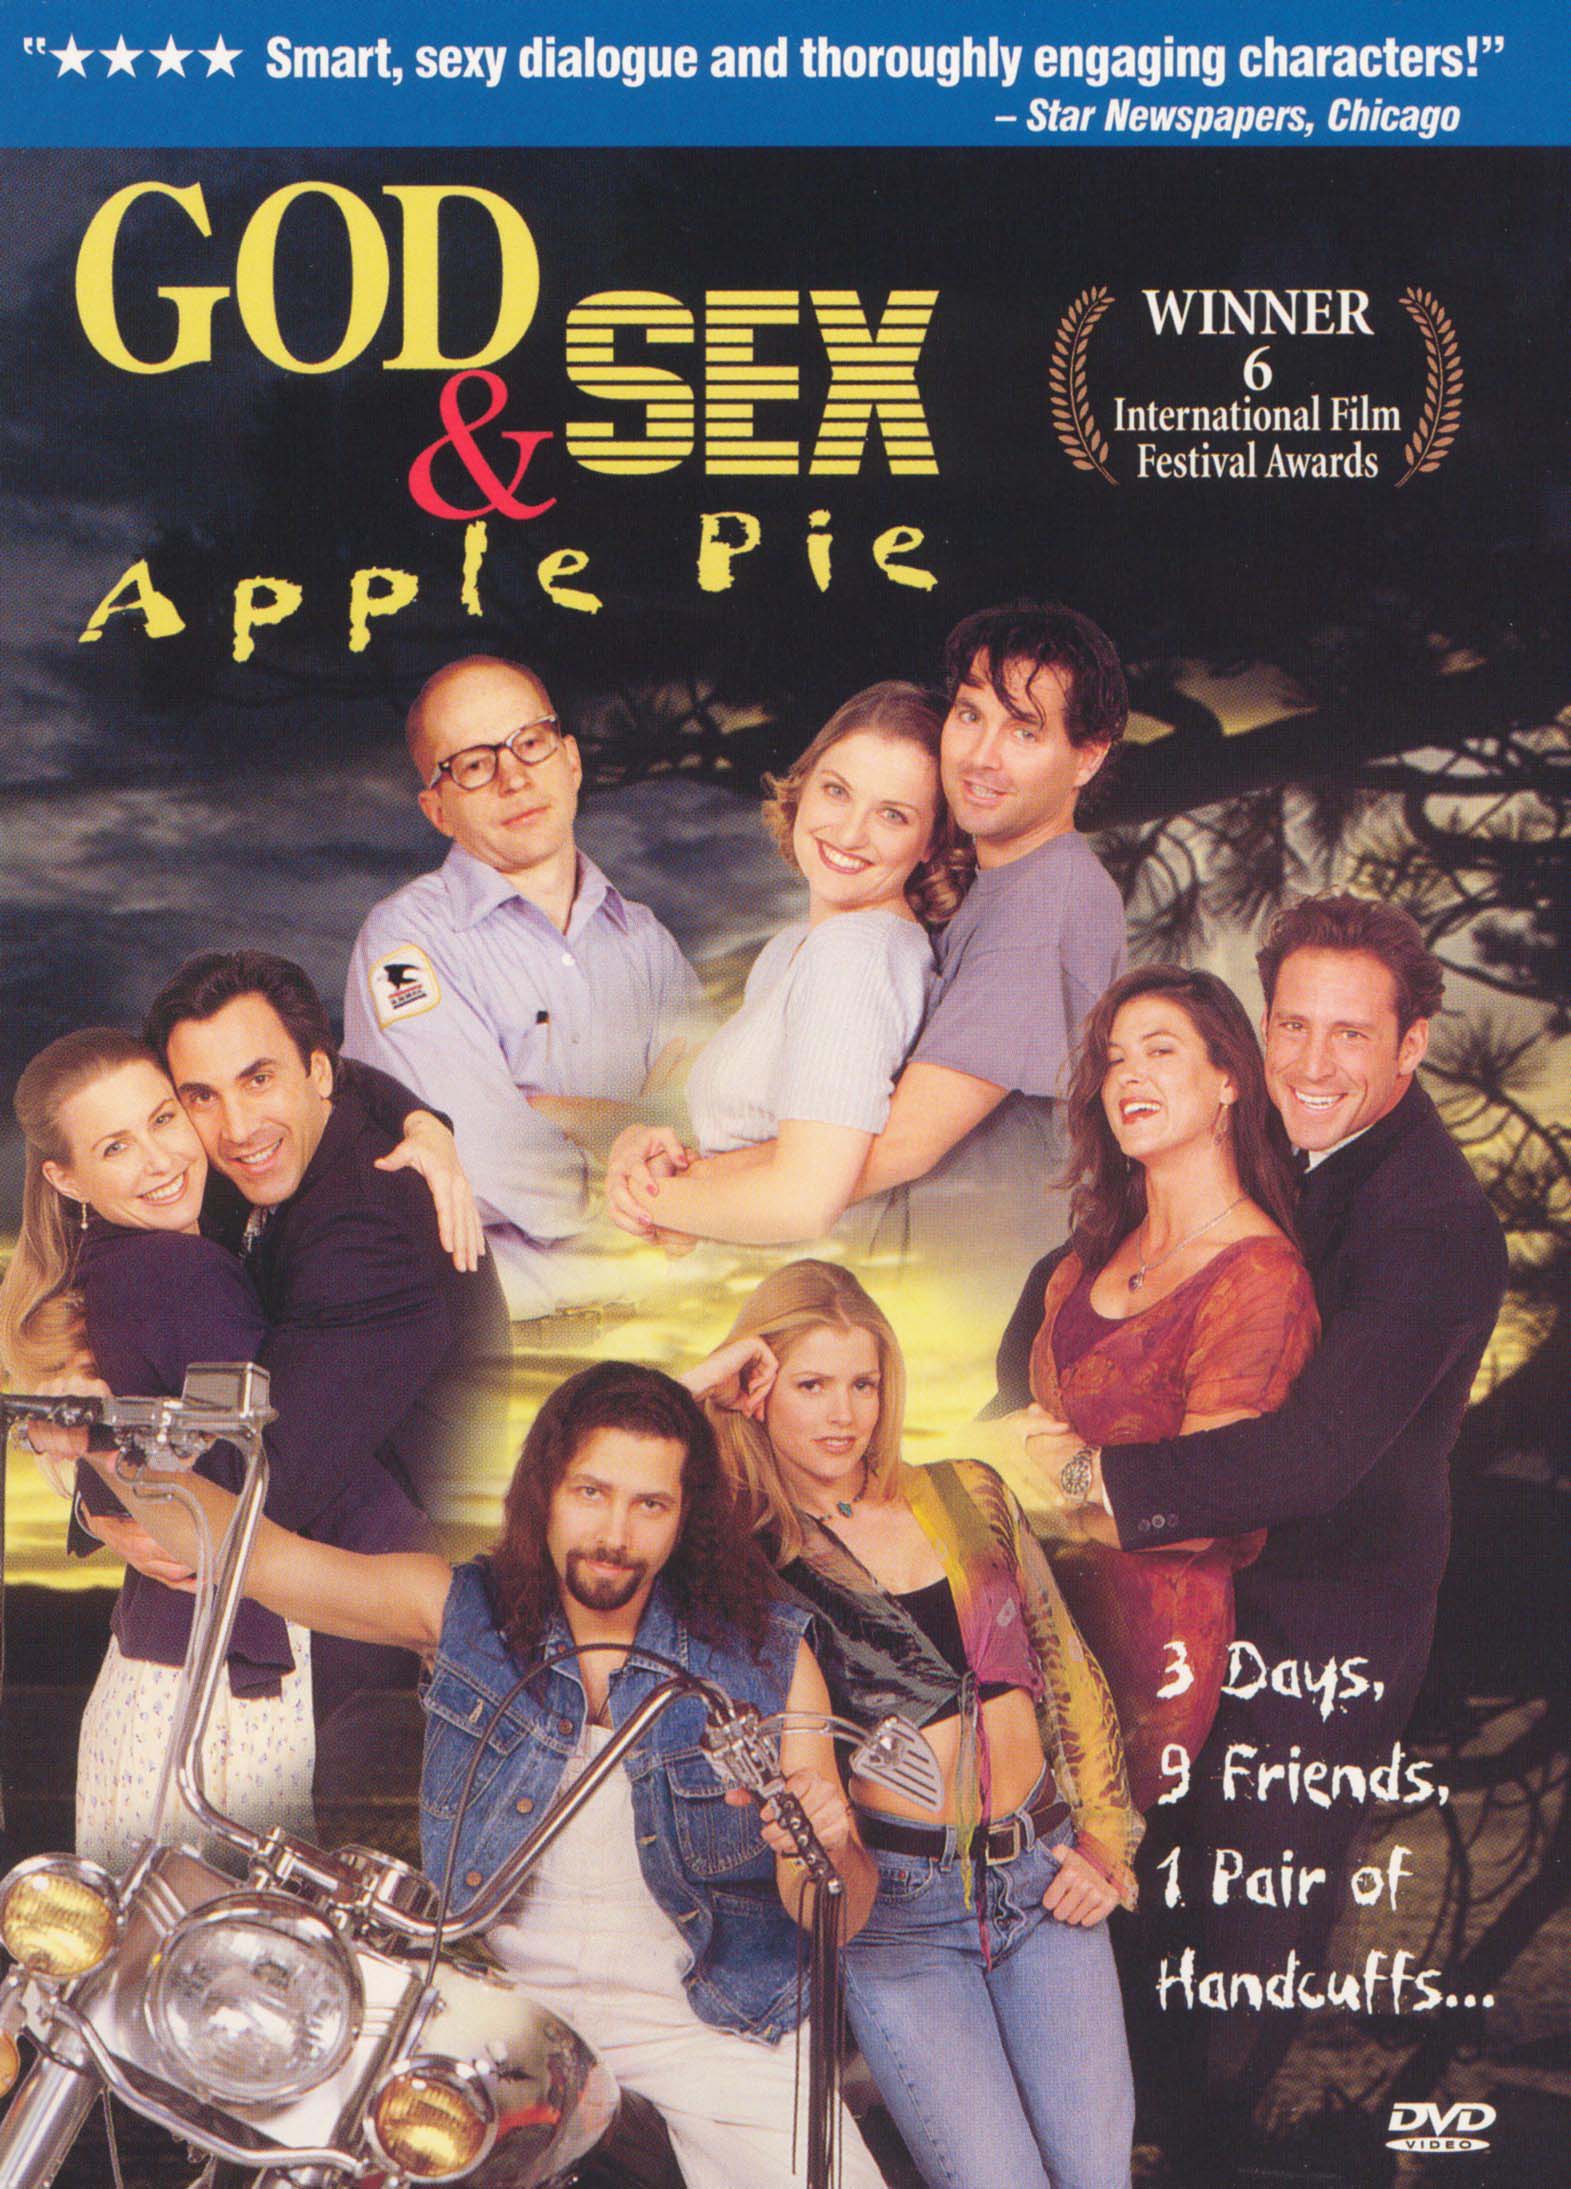 God Sex And Apple Pie 2001 Paul Leaf Synopsis